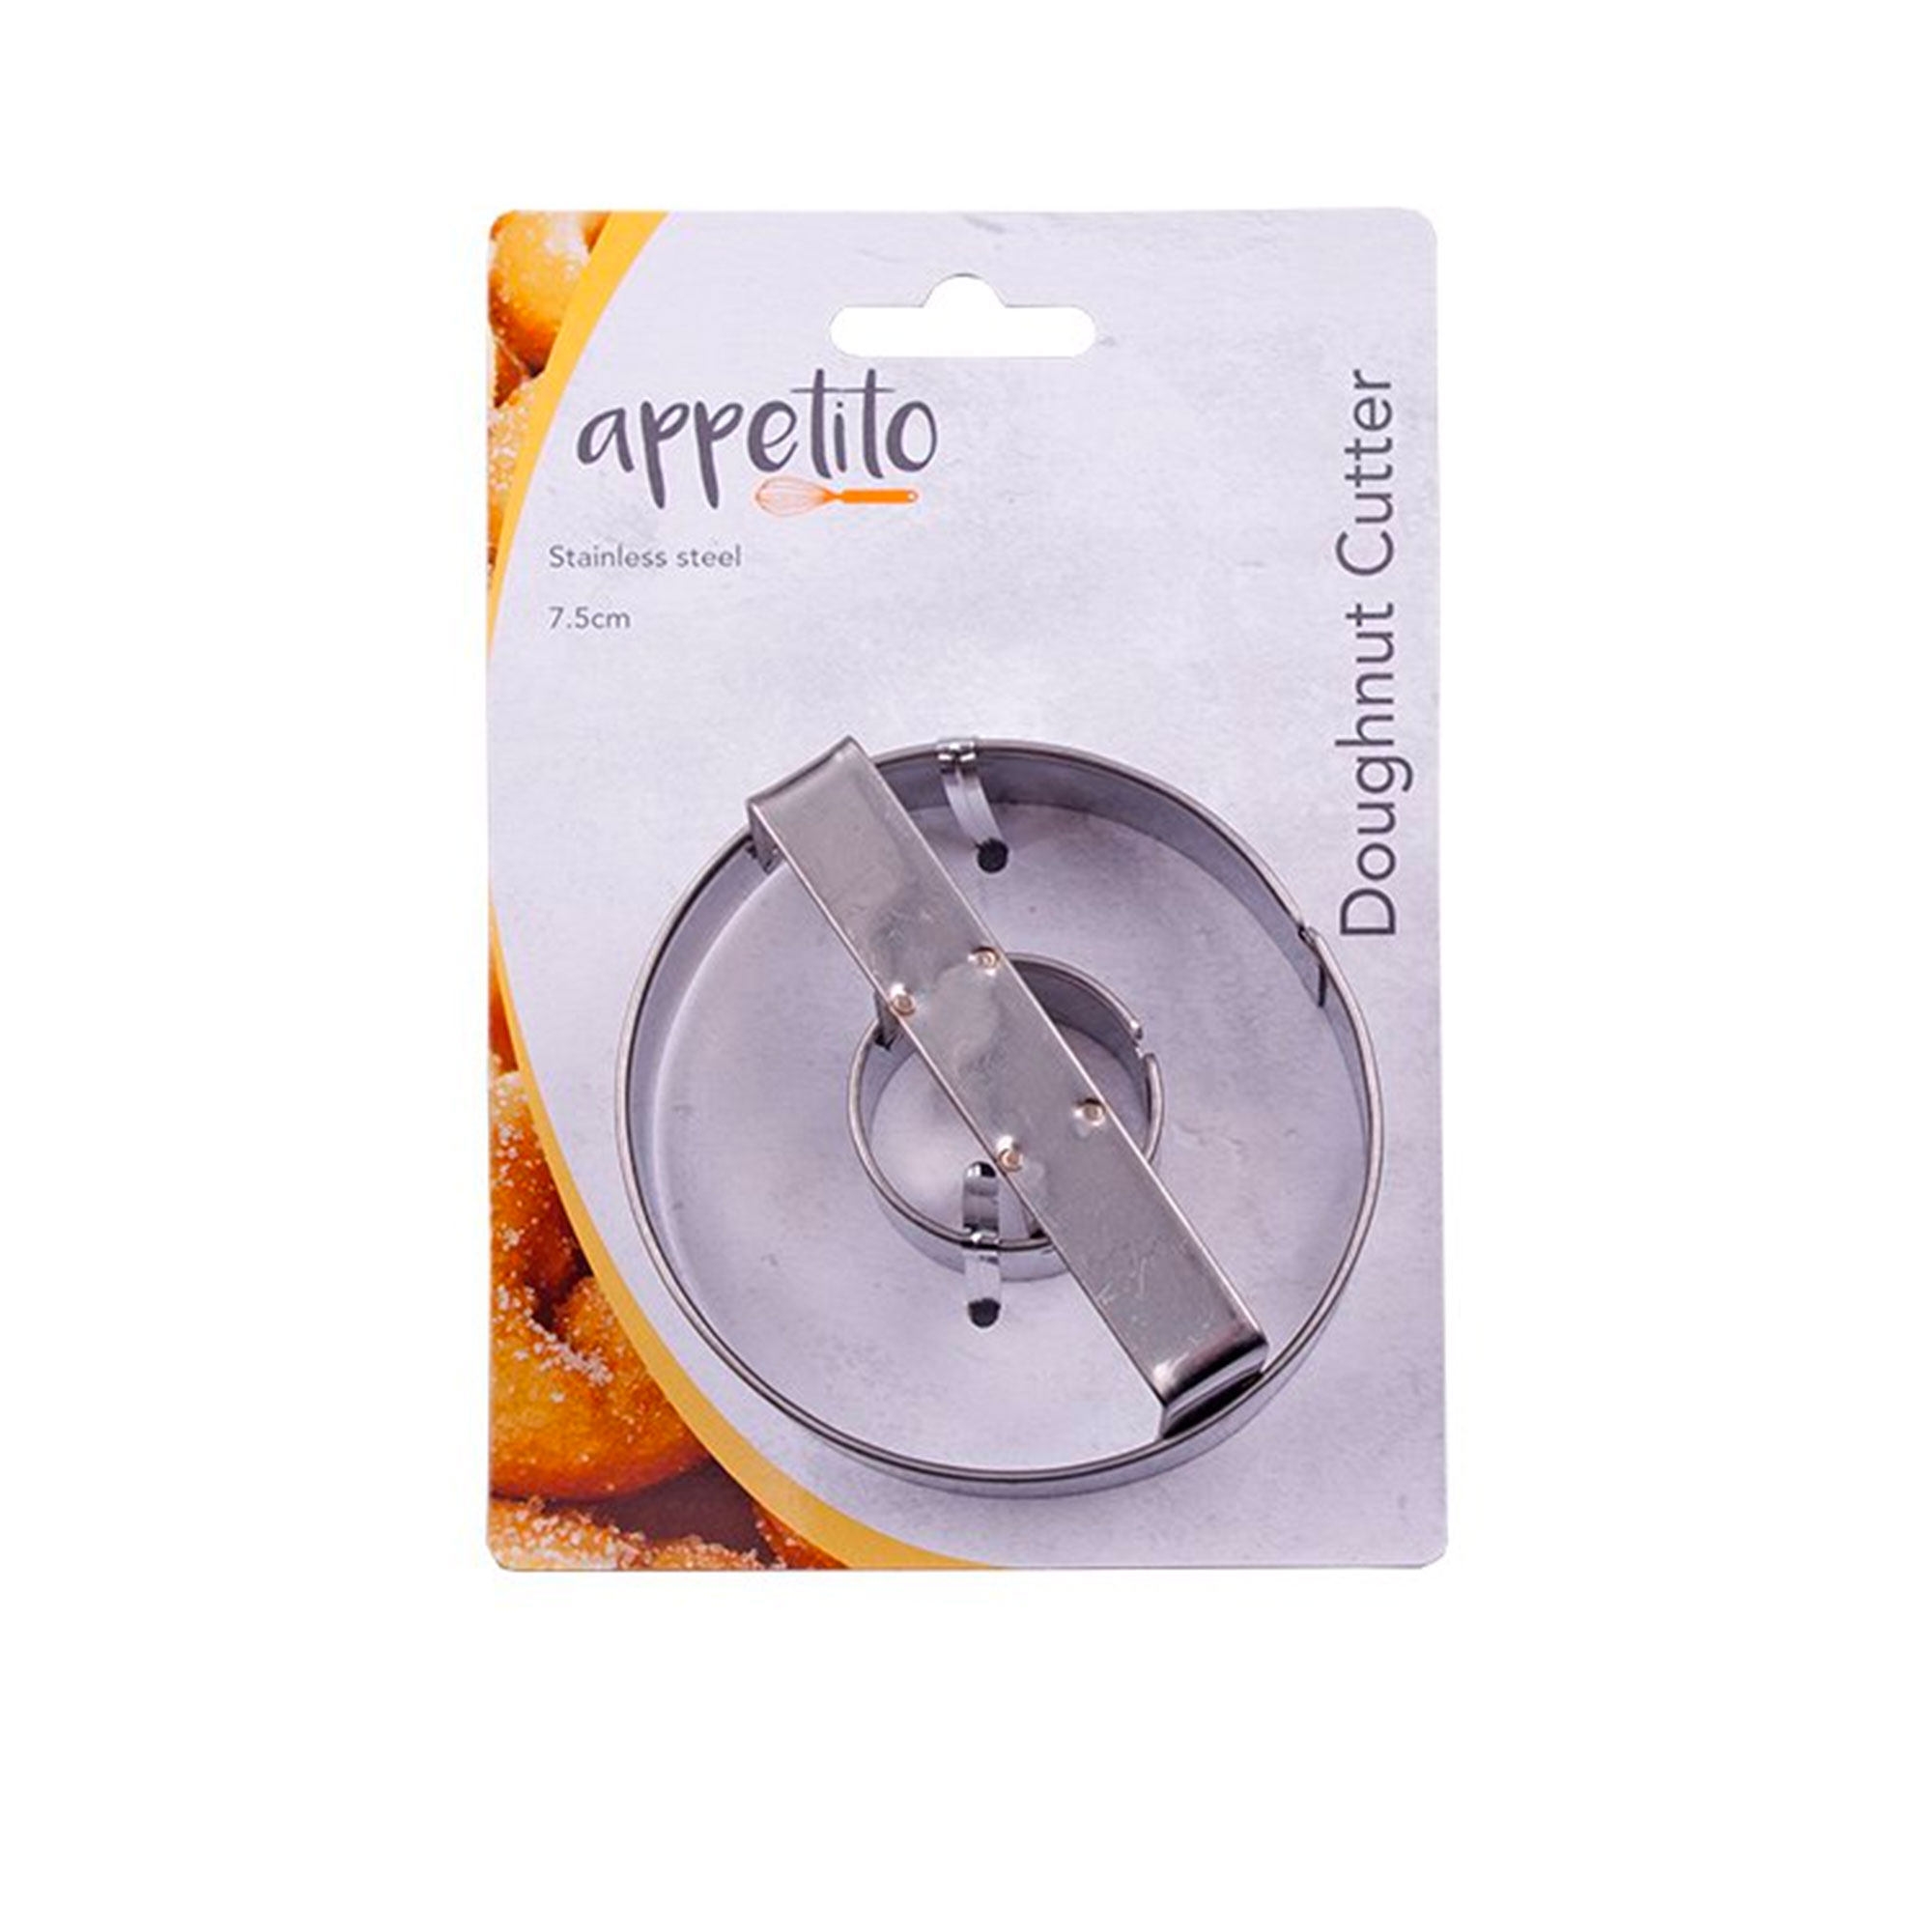 Appetito Doughnut Cutter Stainless Steel 7.5cm Image 2